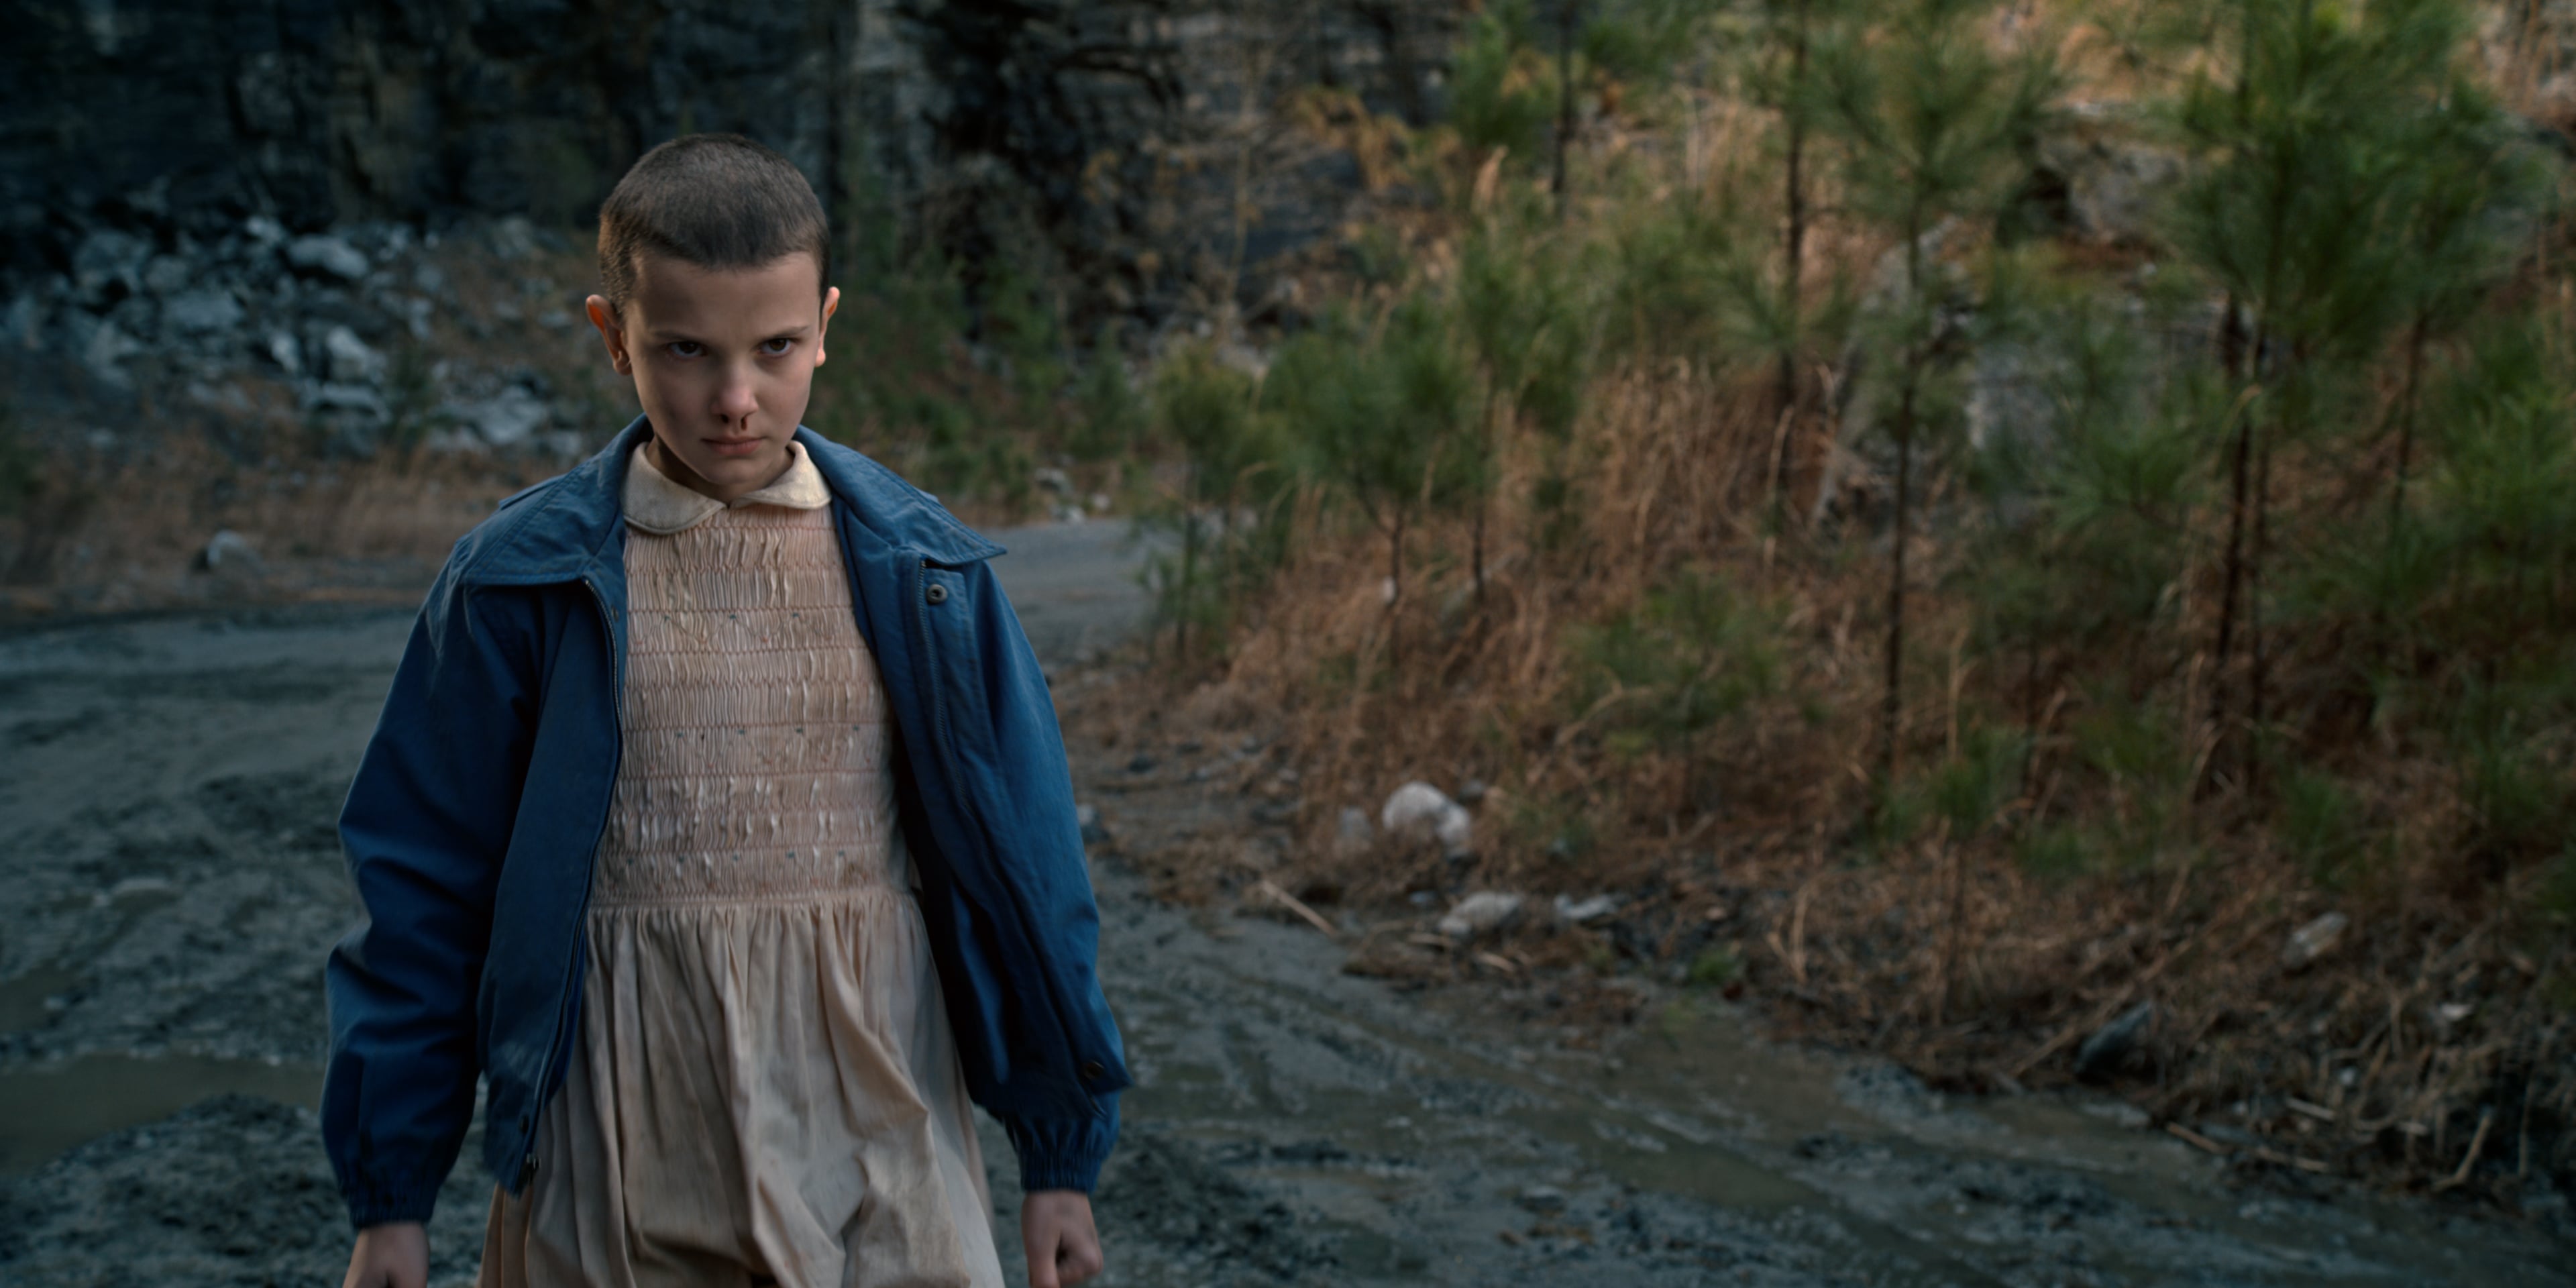 The flowery billabong top worn by Eleven (Millie Bobby Brown) in the series Stranger  Things (Season 4 Episode 9)